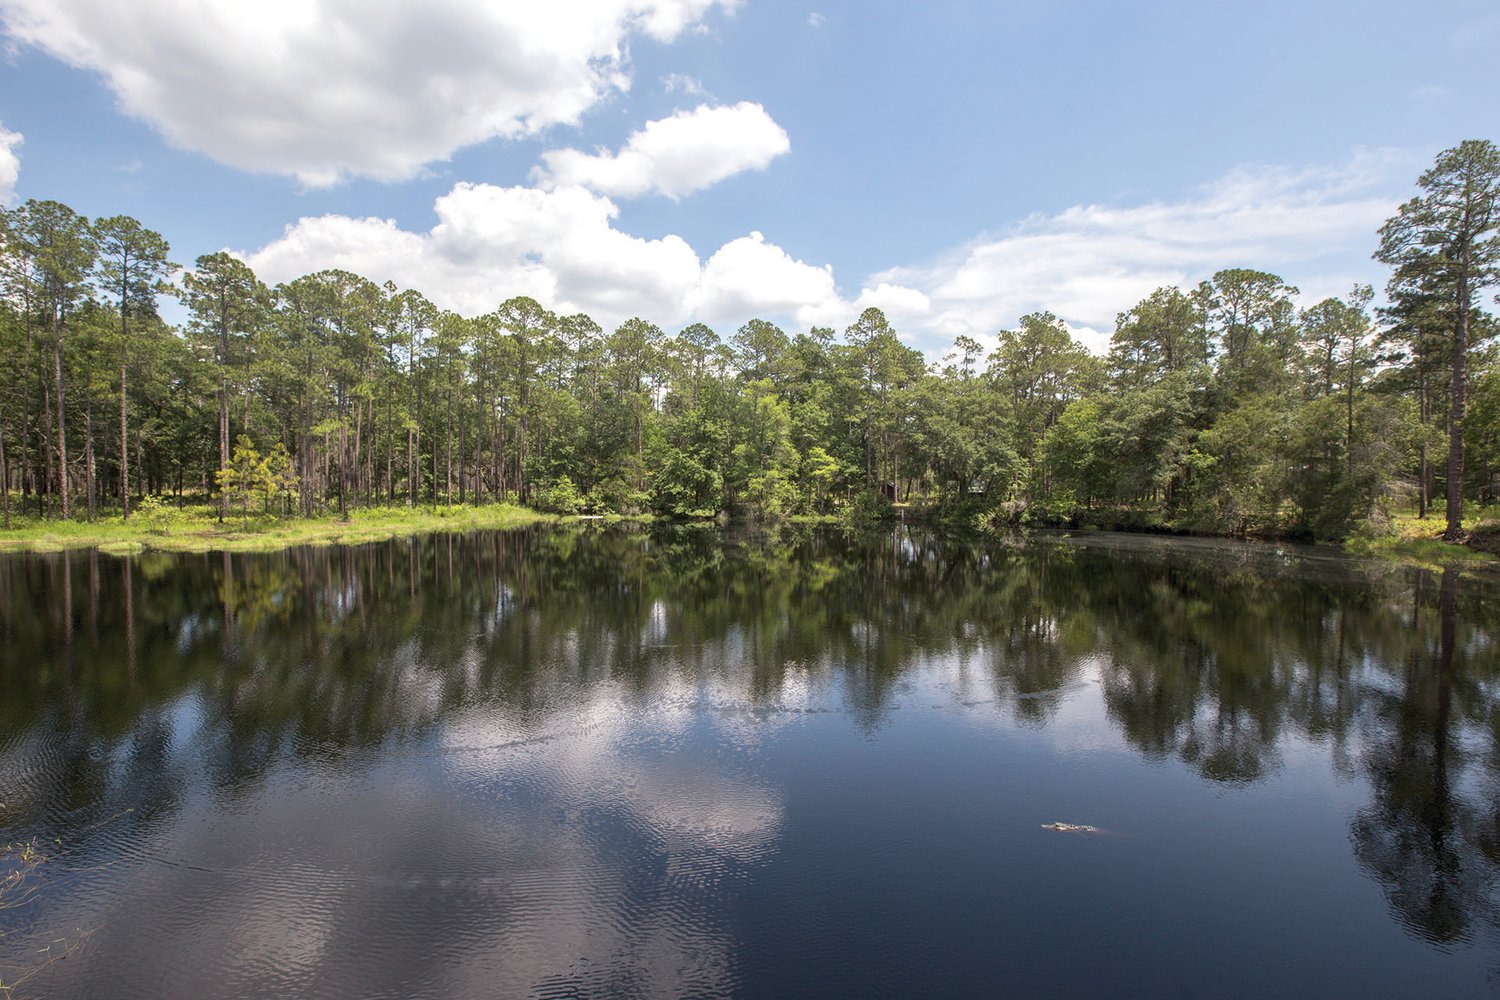 Lake Mize at the Austin Cary Memorial Forest in Florida.